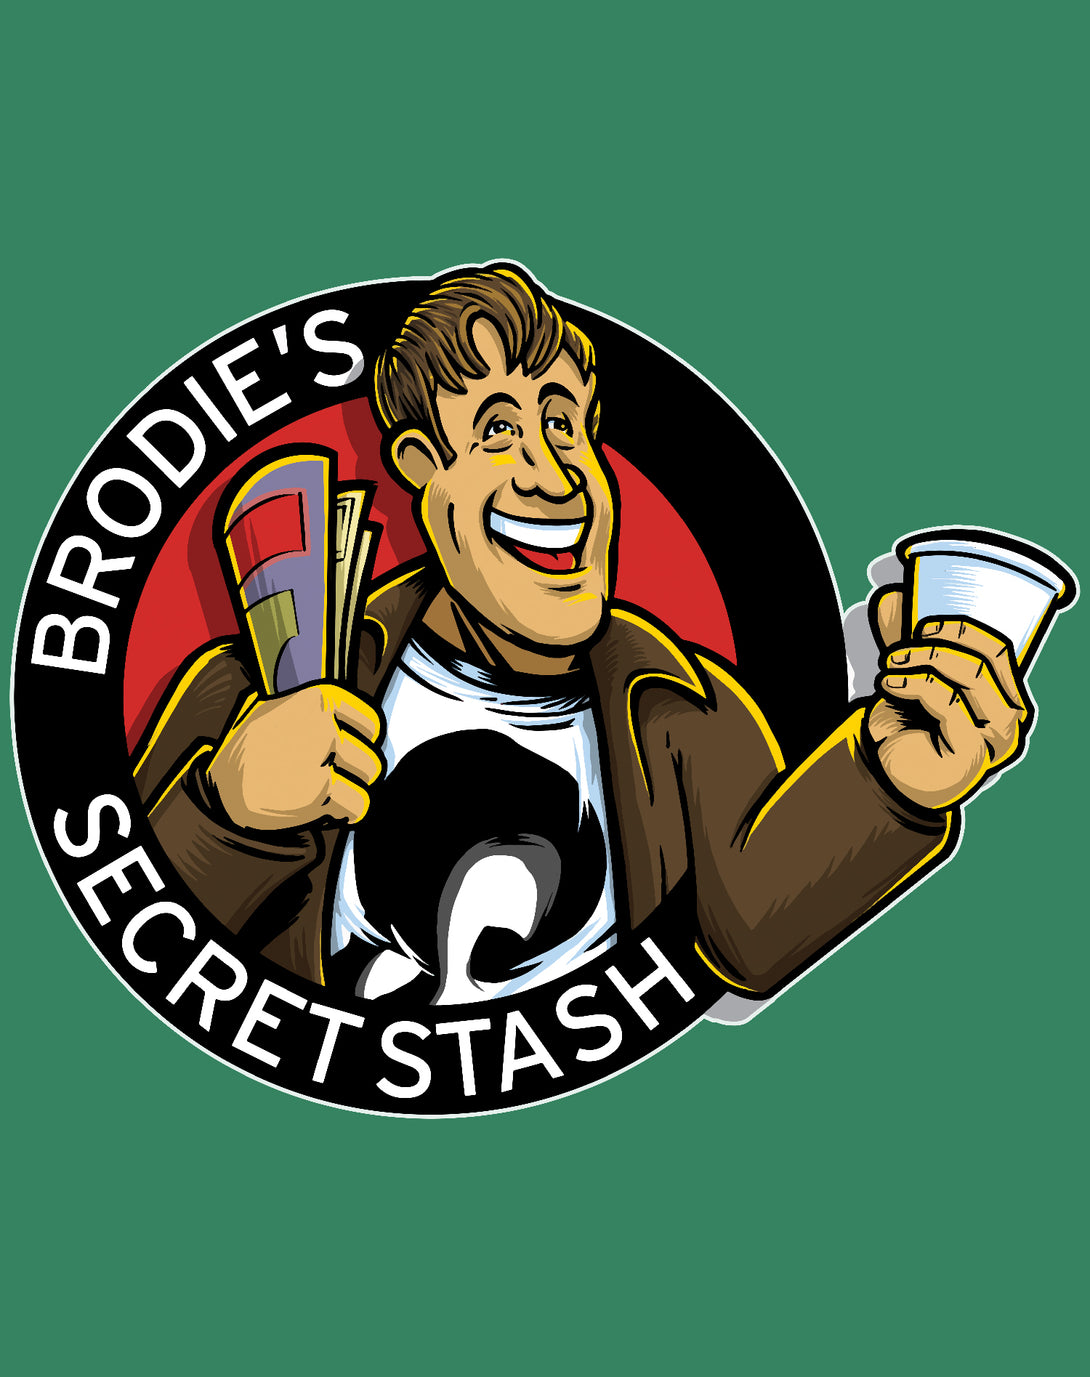 Kevin Smith Jay & Silent Bob Reboot Brodie's Secret Stash Comic Book Store Logo Official Women's T-Shirt Green - Urban Species Design Close Up